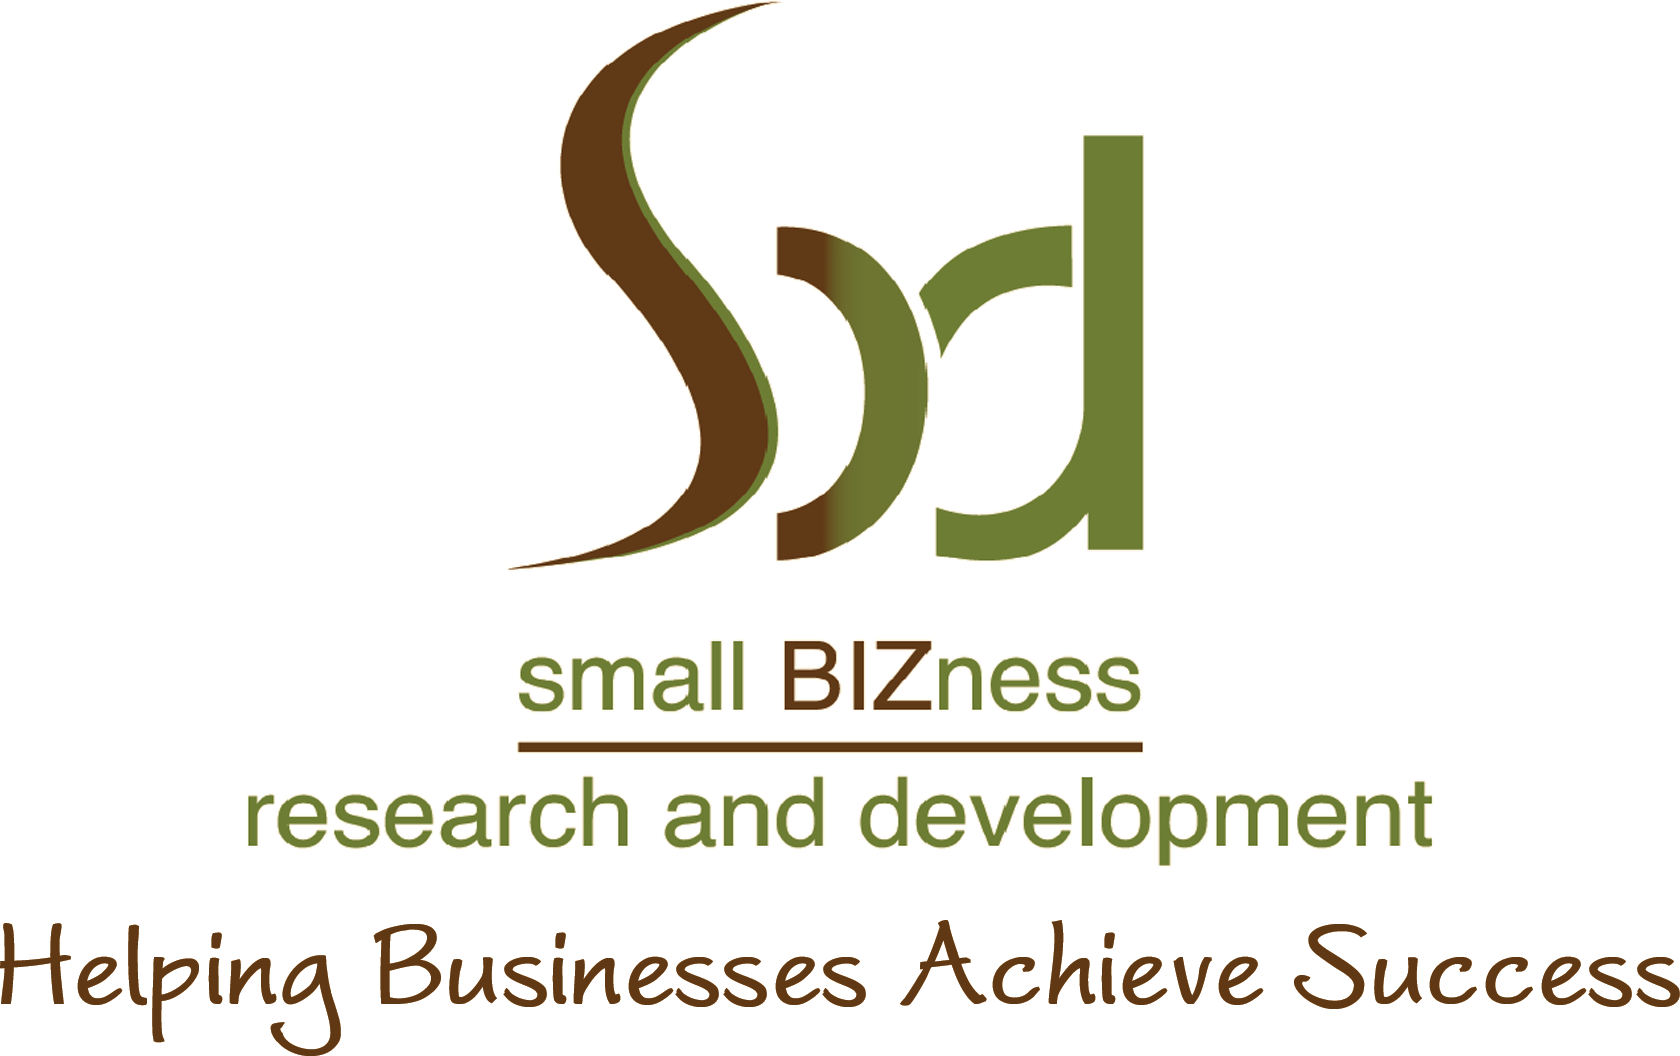 sbizrd: Small Business Research and Development